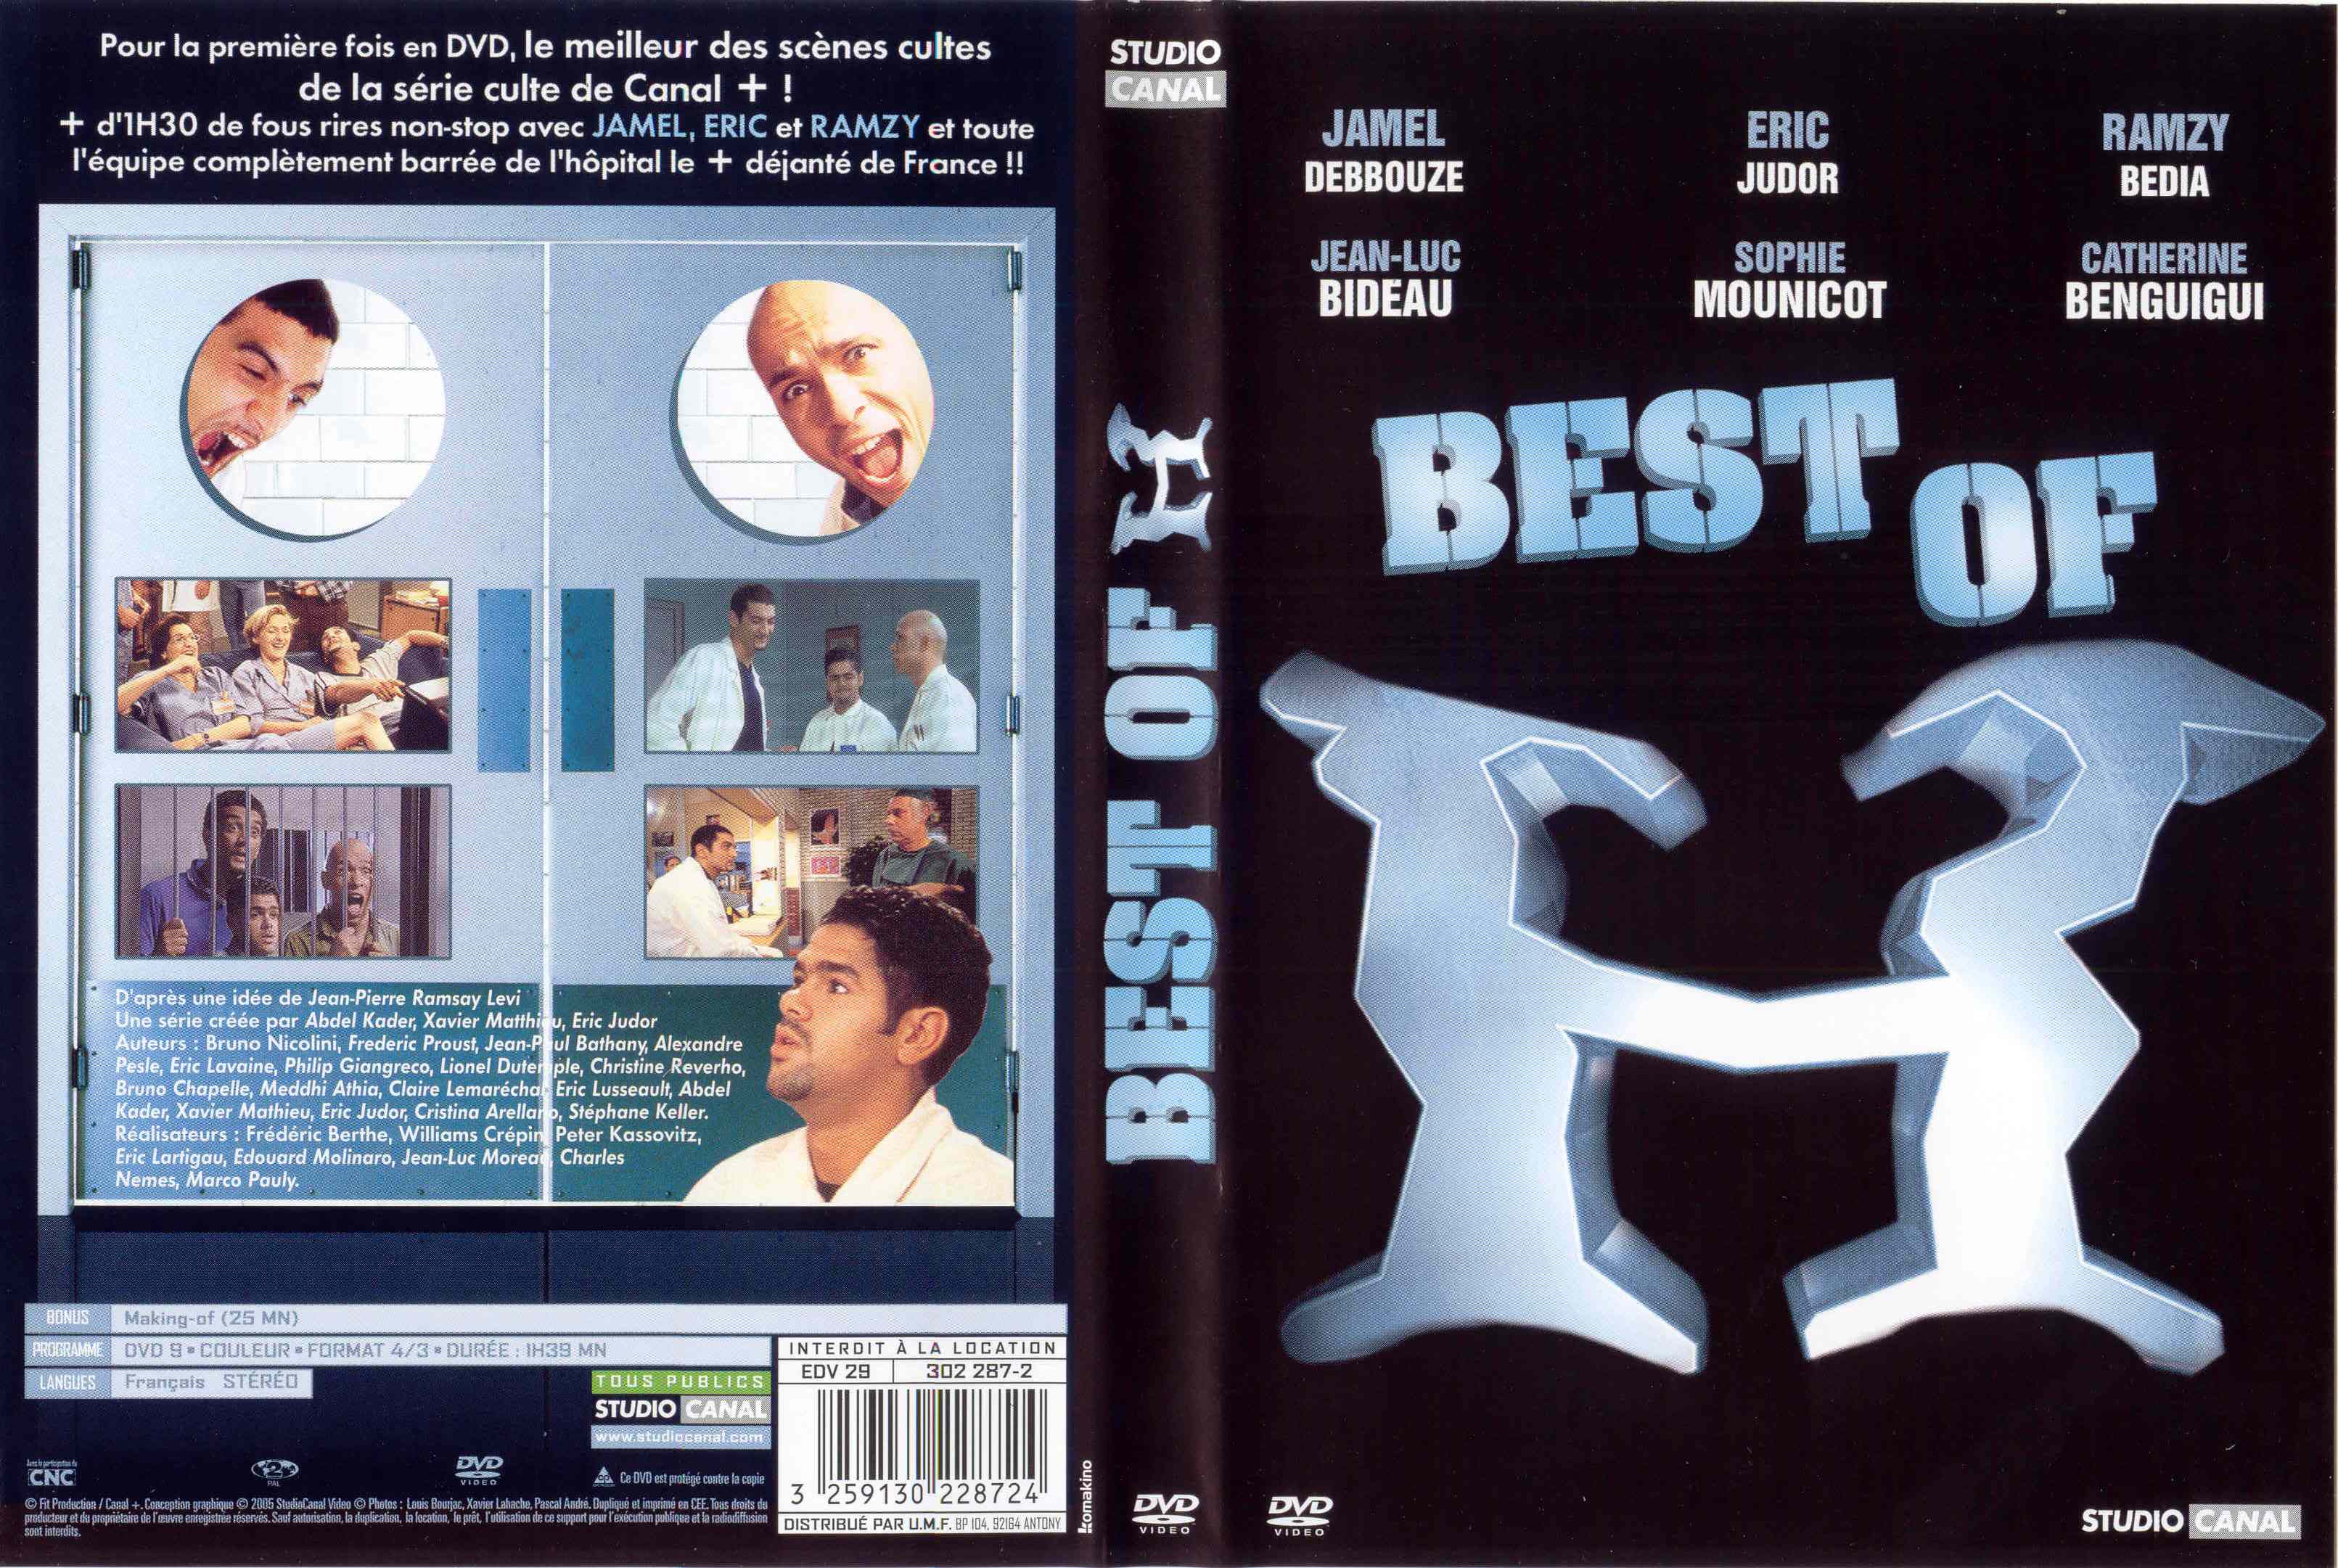 Jaquette DVD H best of